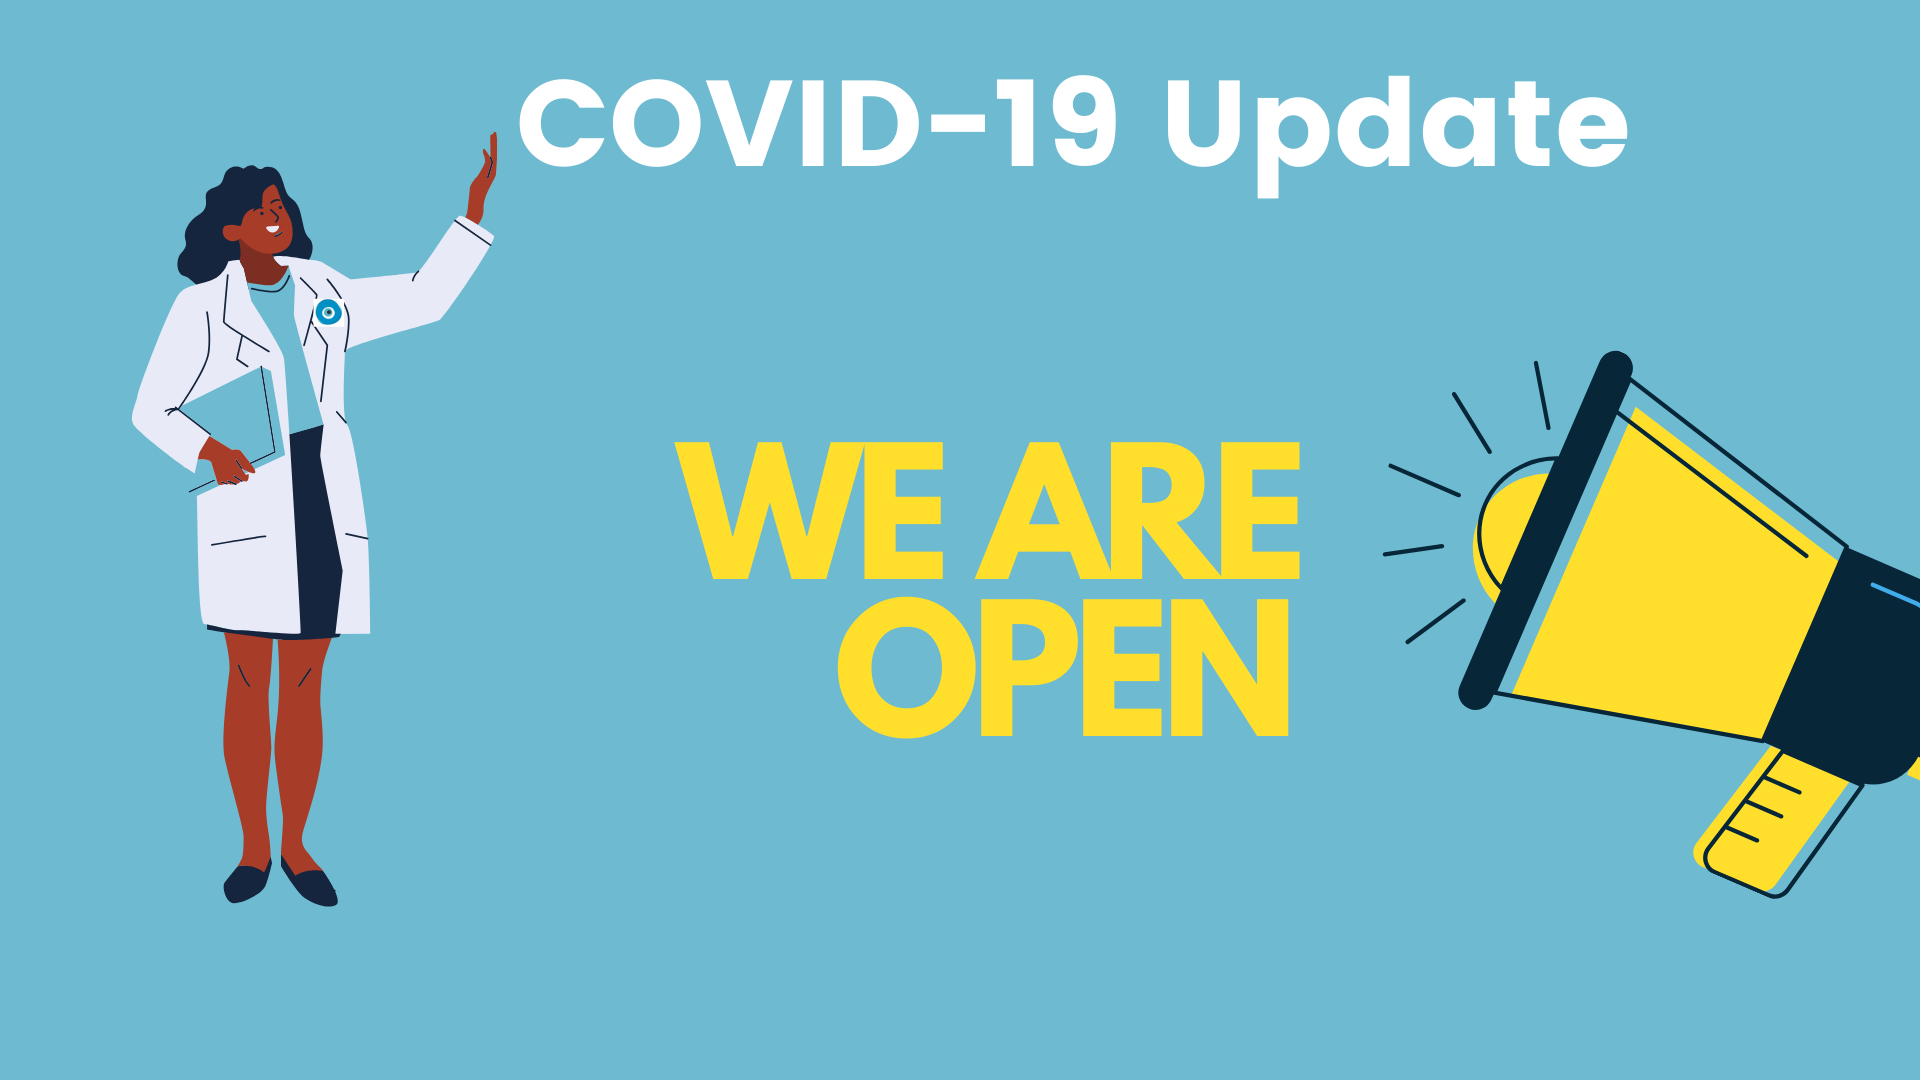 we are open covid-19 dimaco web infographic